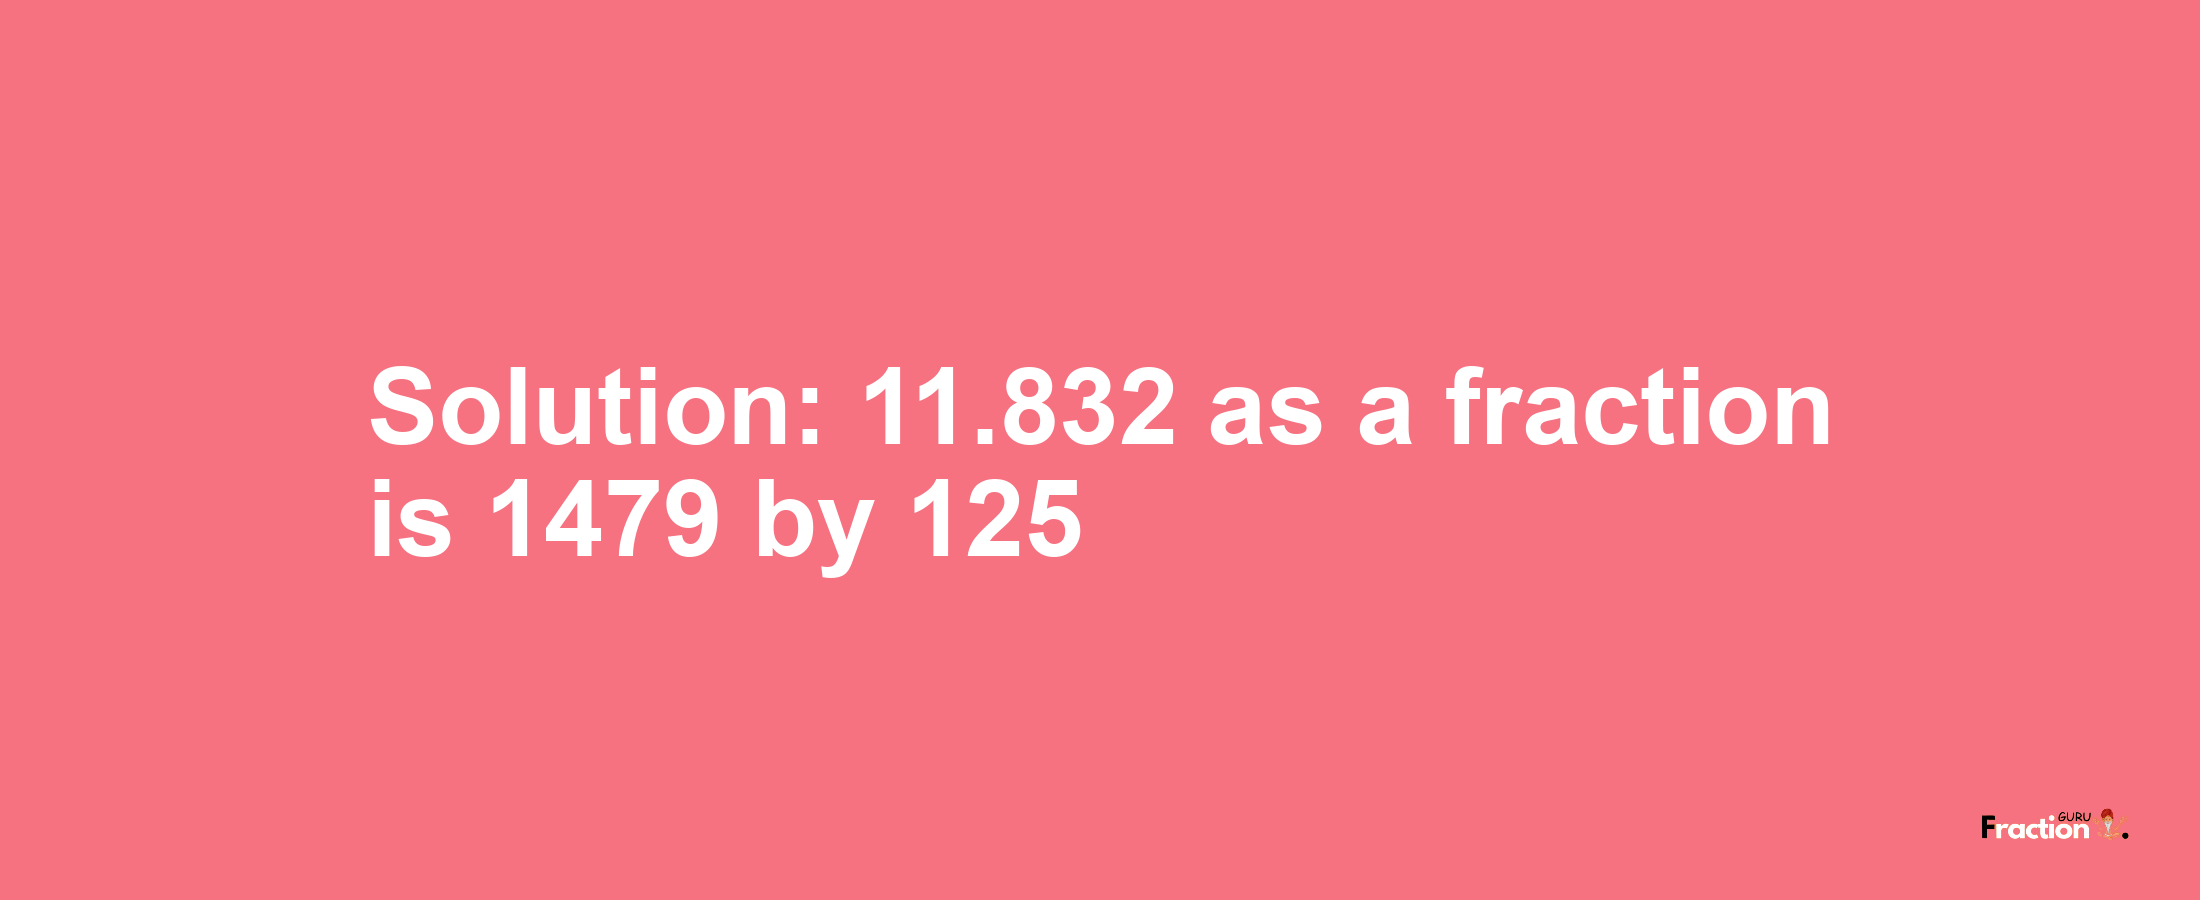 Solution:11.832 as a fraction is 1479/125